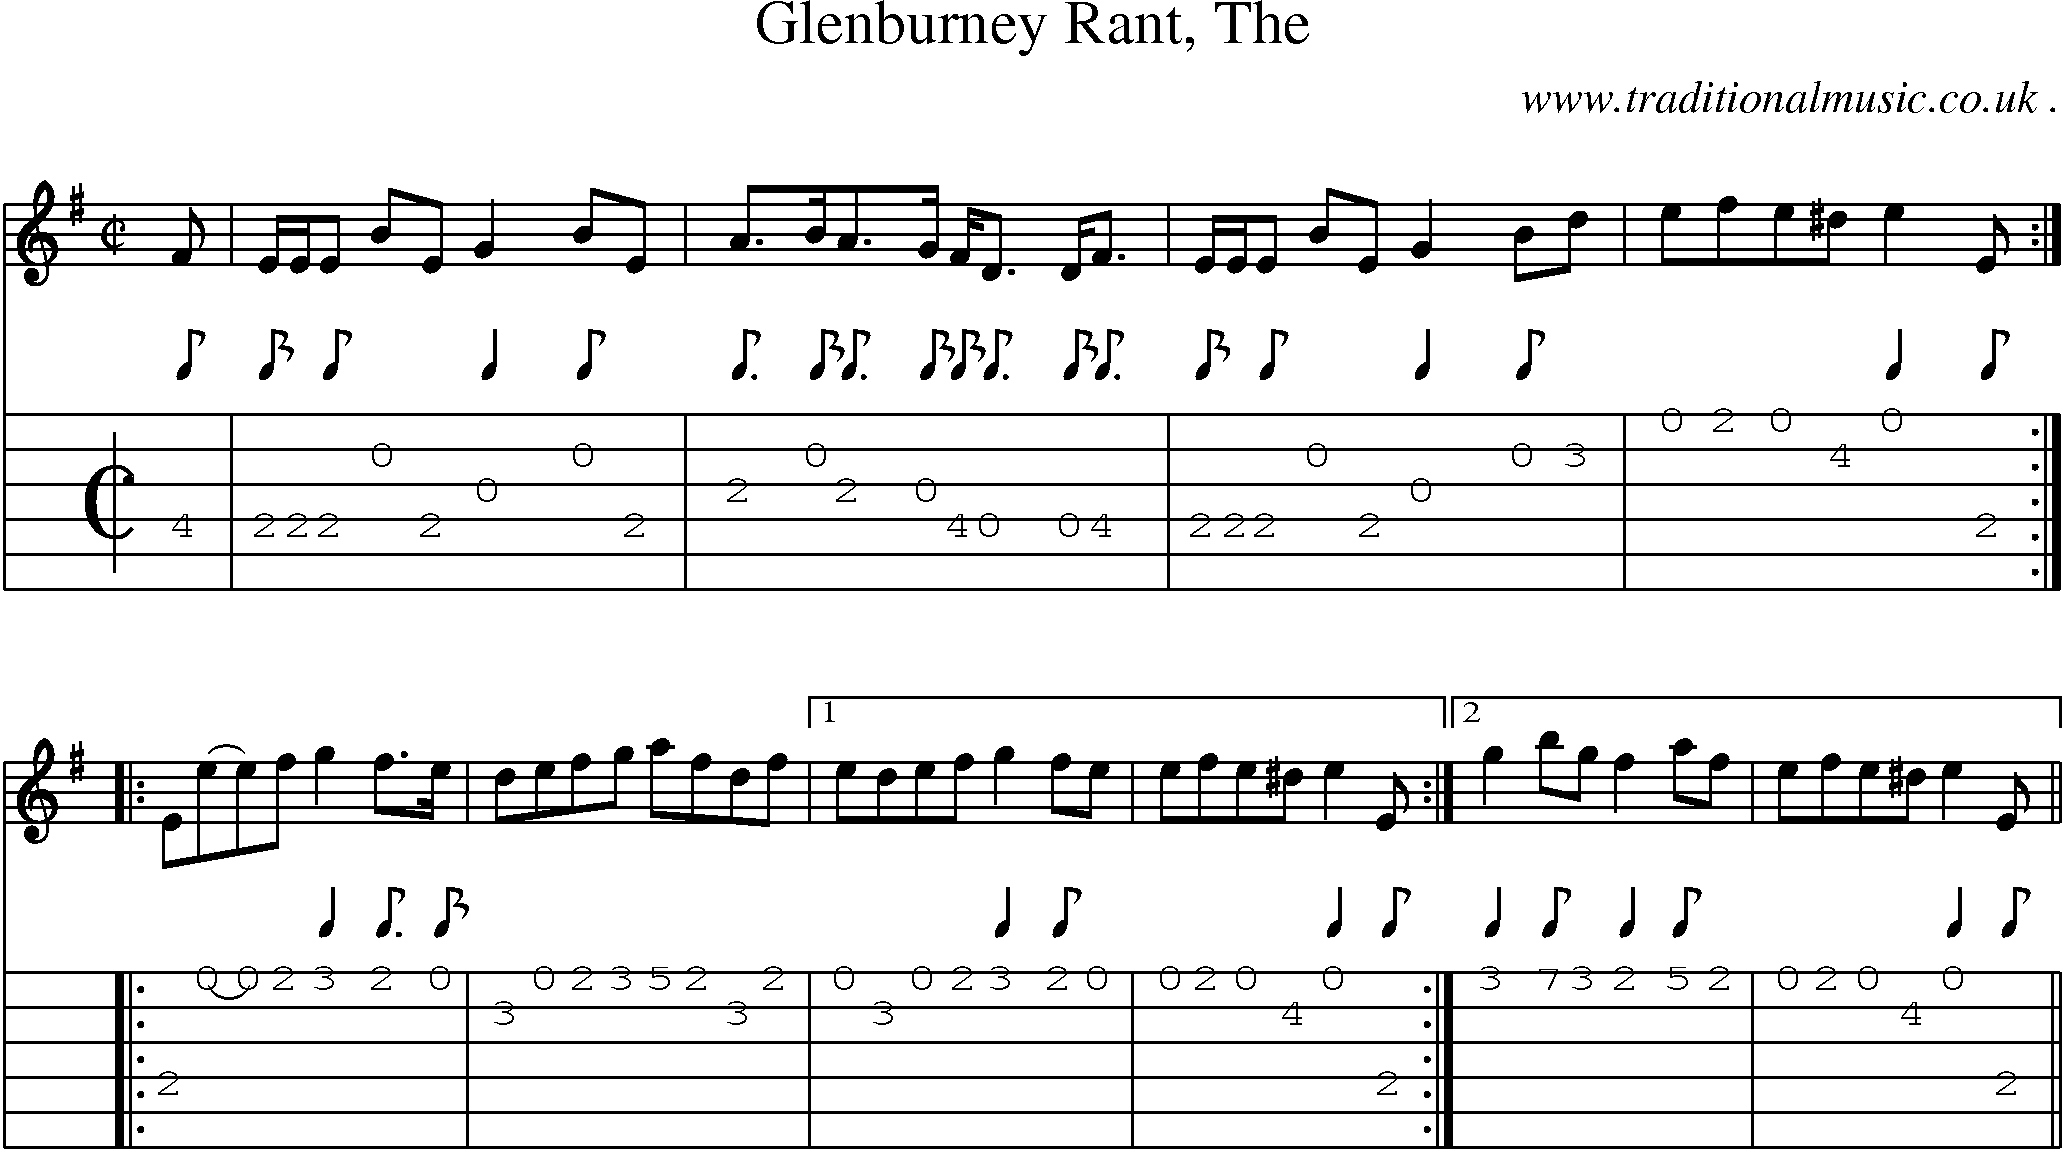 Sheet-music  score, Chords and Guitar Tabs for Glenburney Rant The